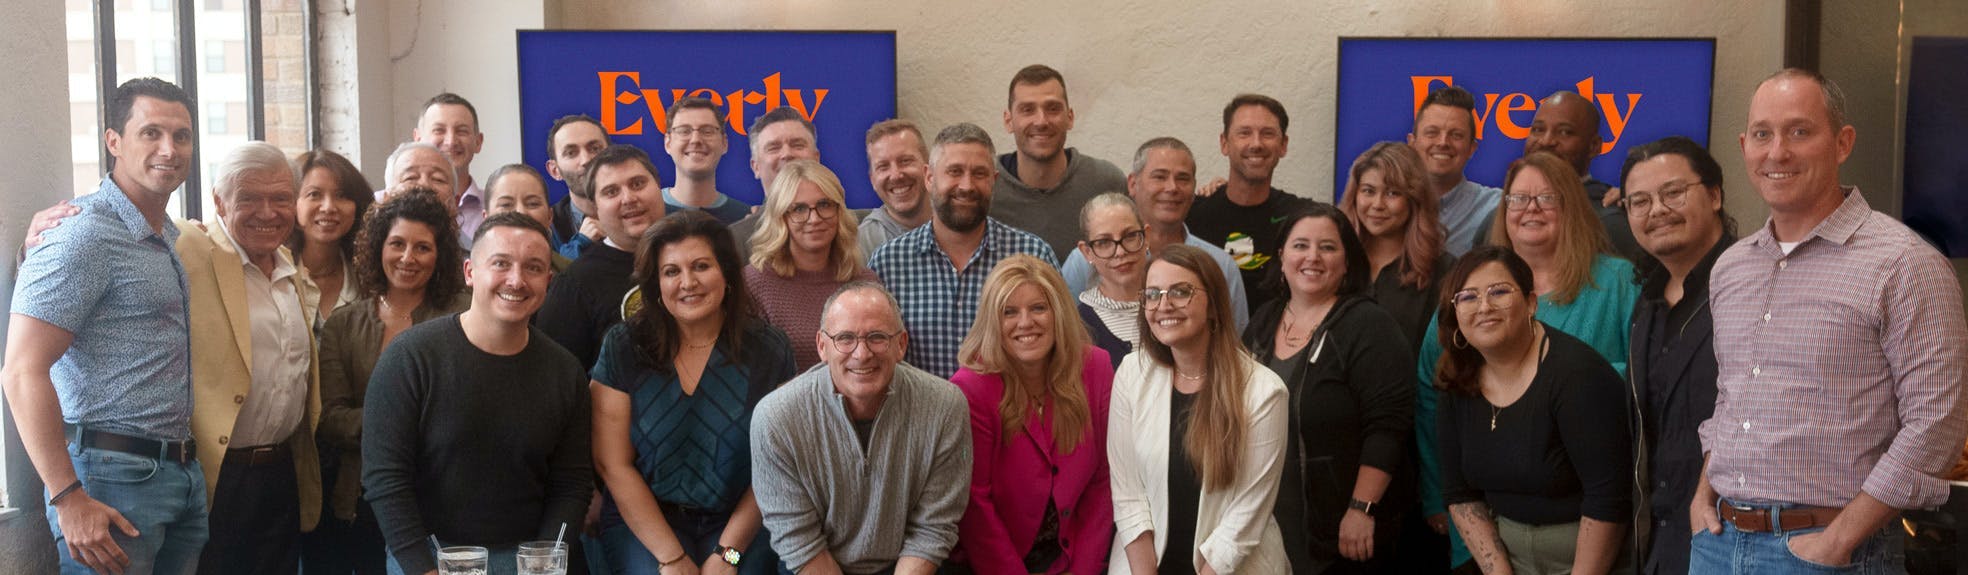 Team photo of Everly's employees. 